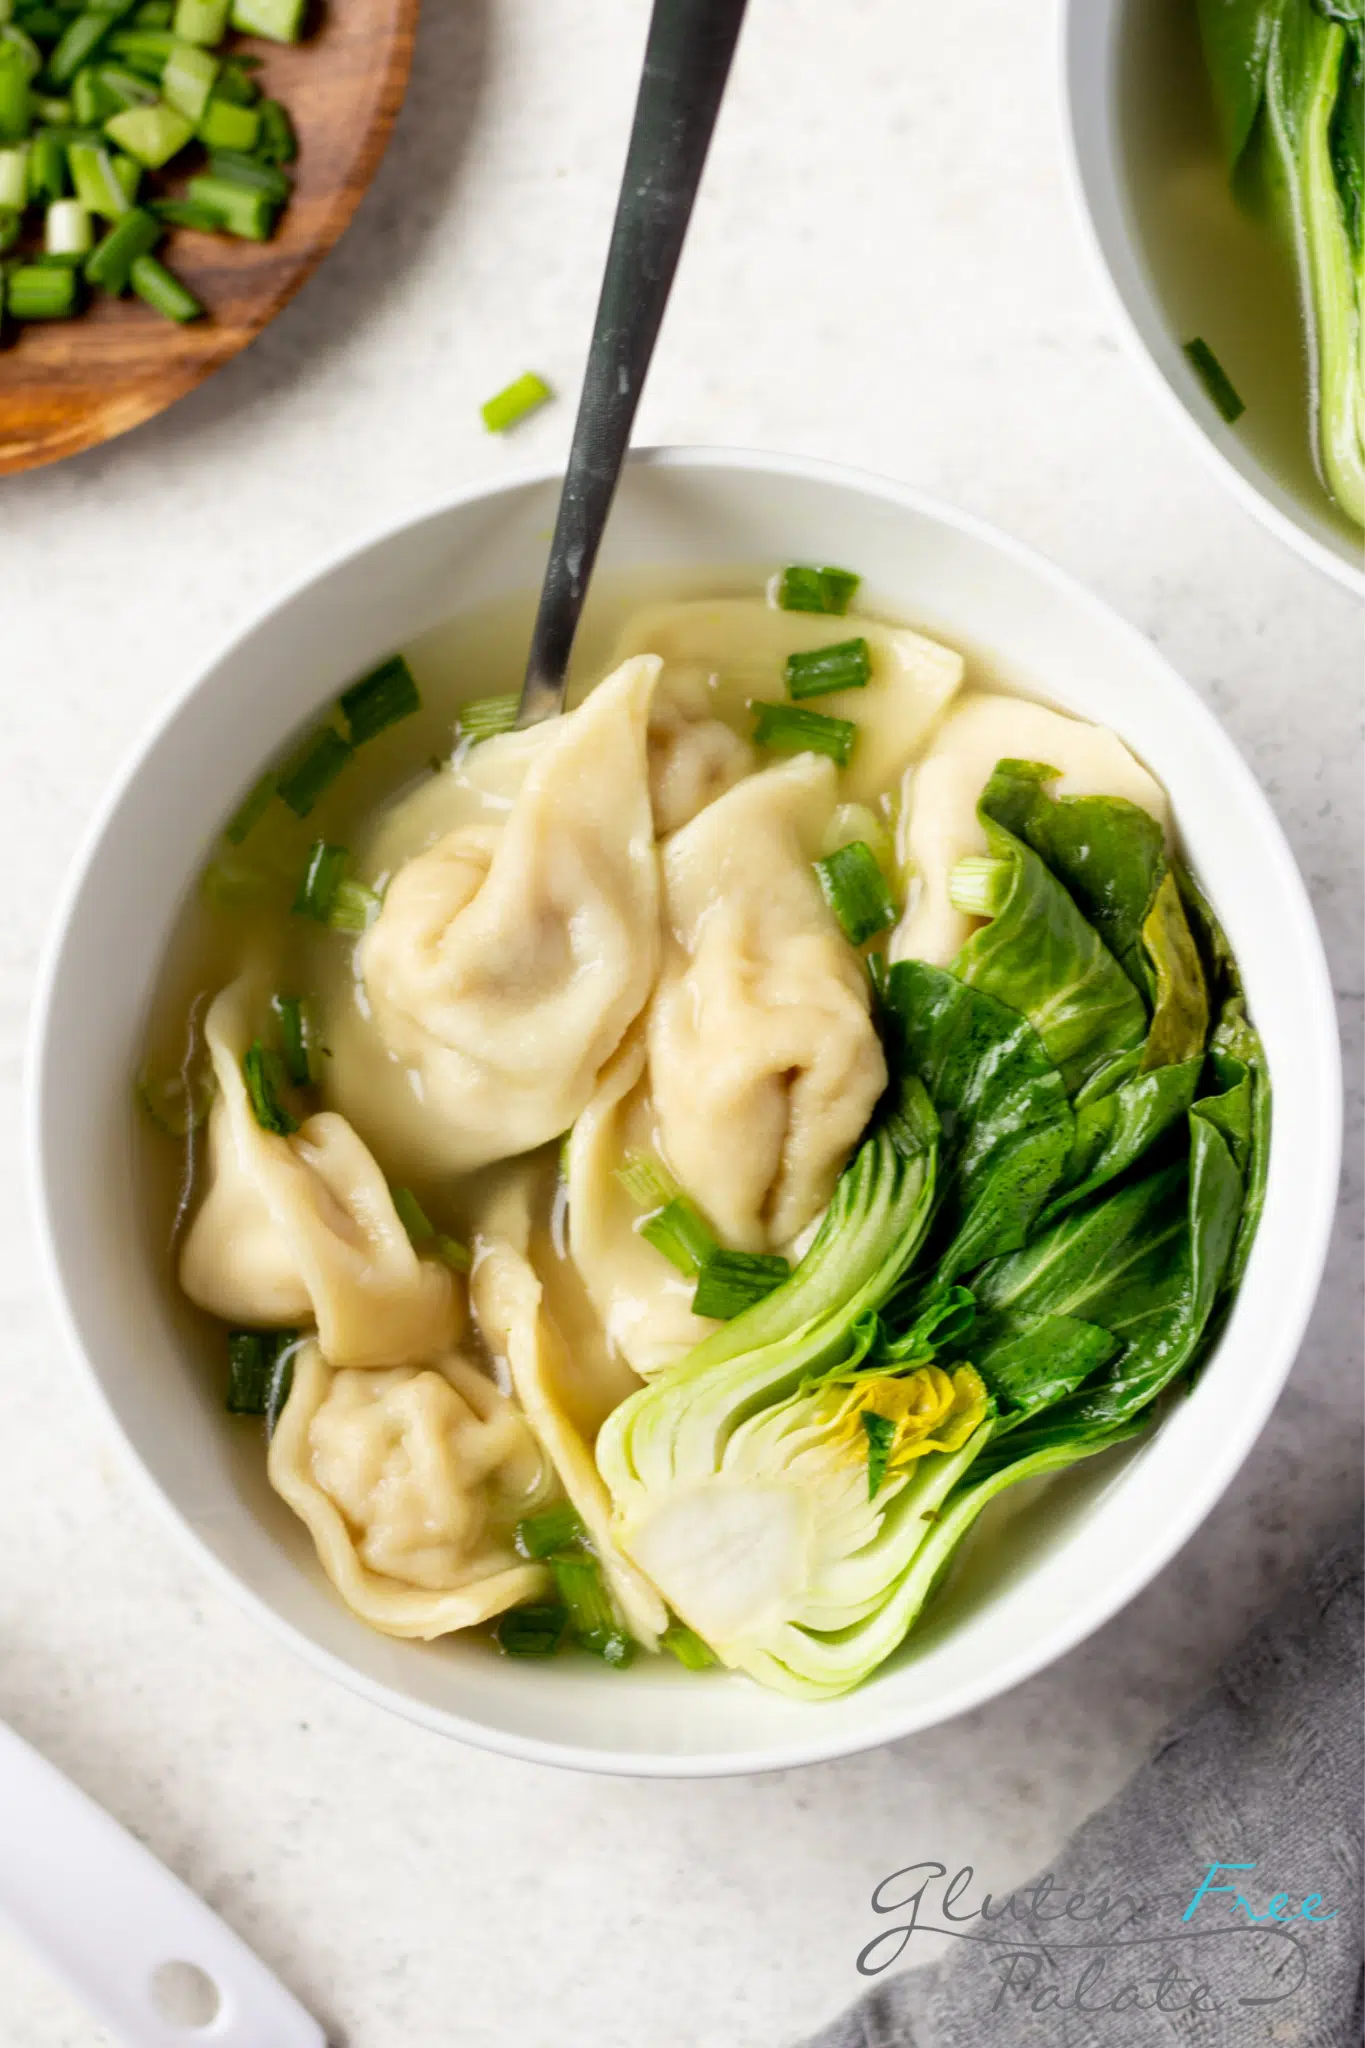 a white bowl of gluten-free wonton soup with baby Bok choi. Gluten-free wont wrappers are in the soup.